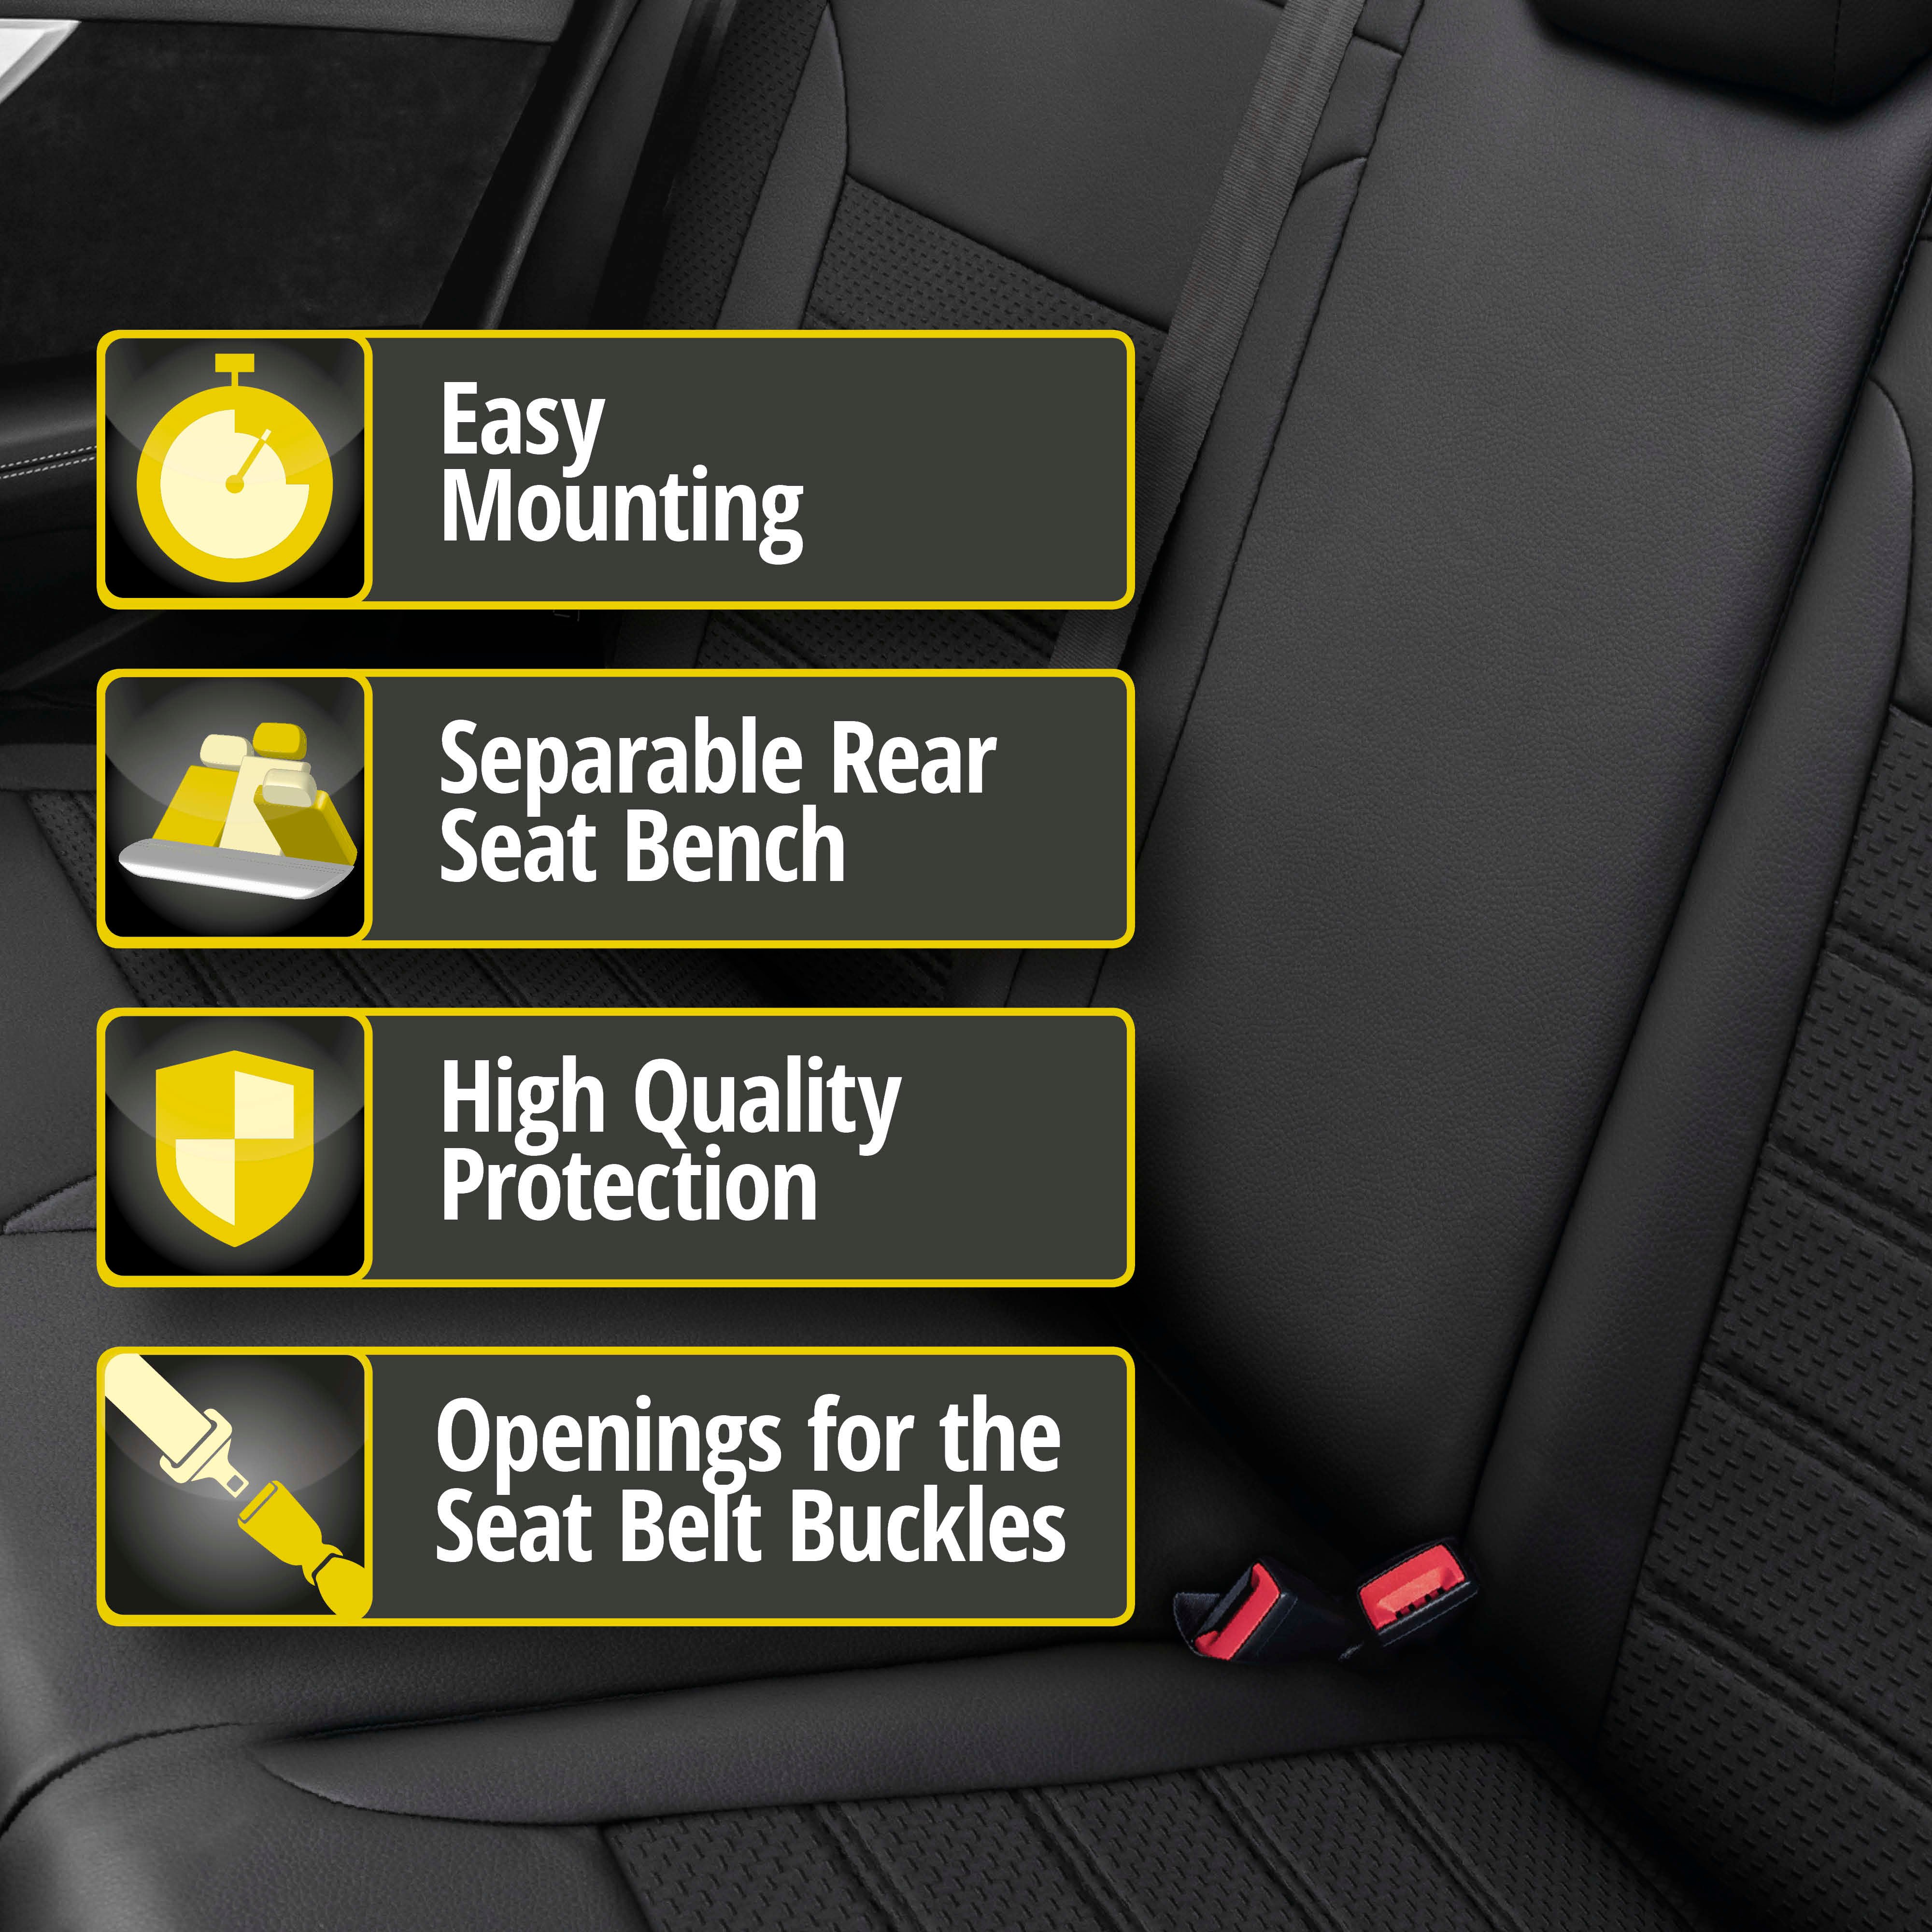 Seat cover Expedit for VW Passat Highline from 2015 to present, 1 rear seat cover for normal seats